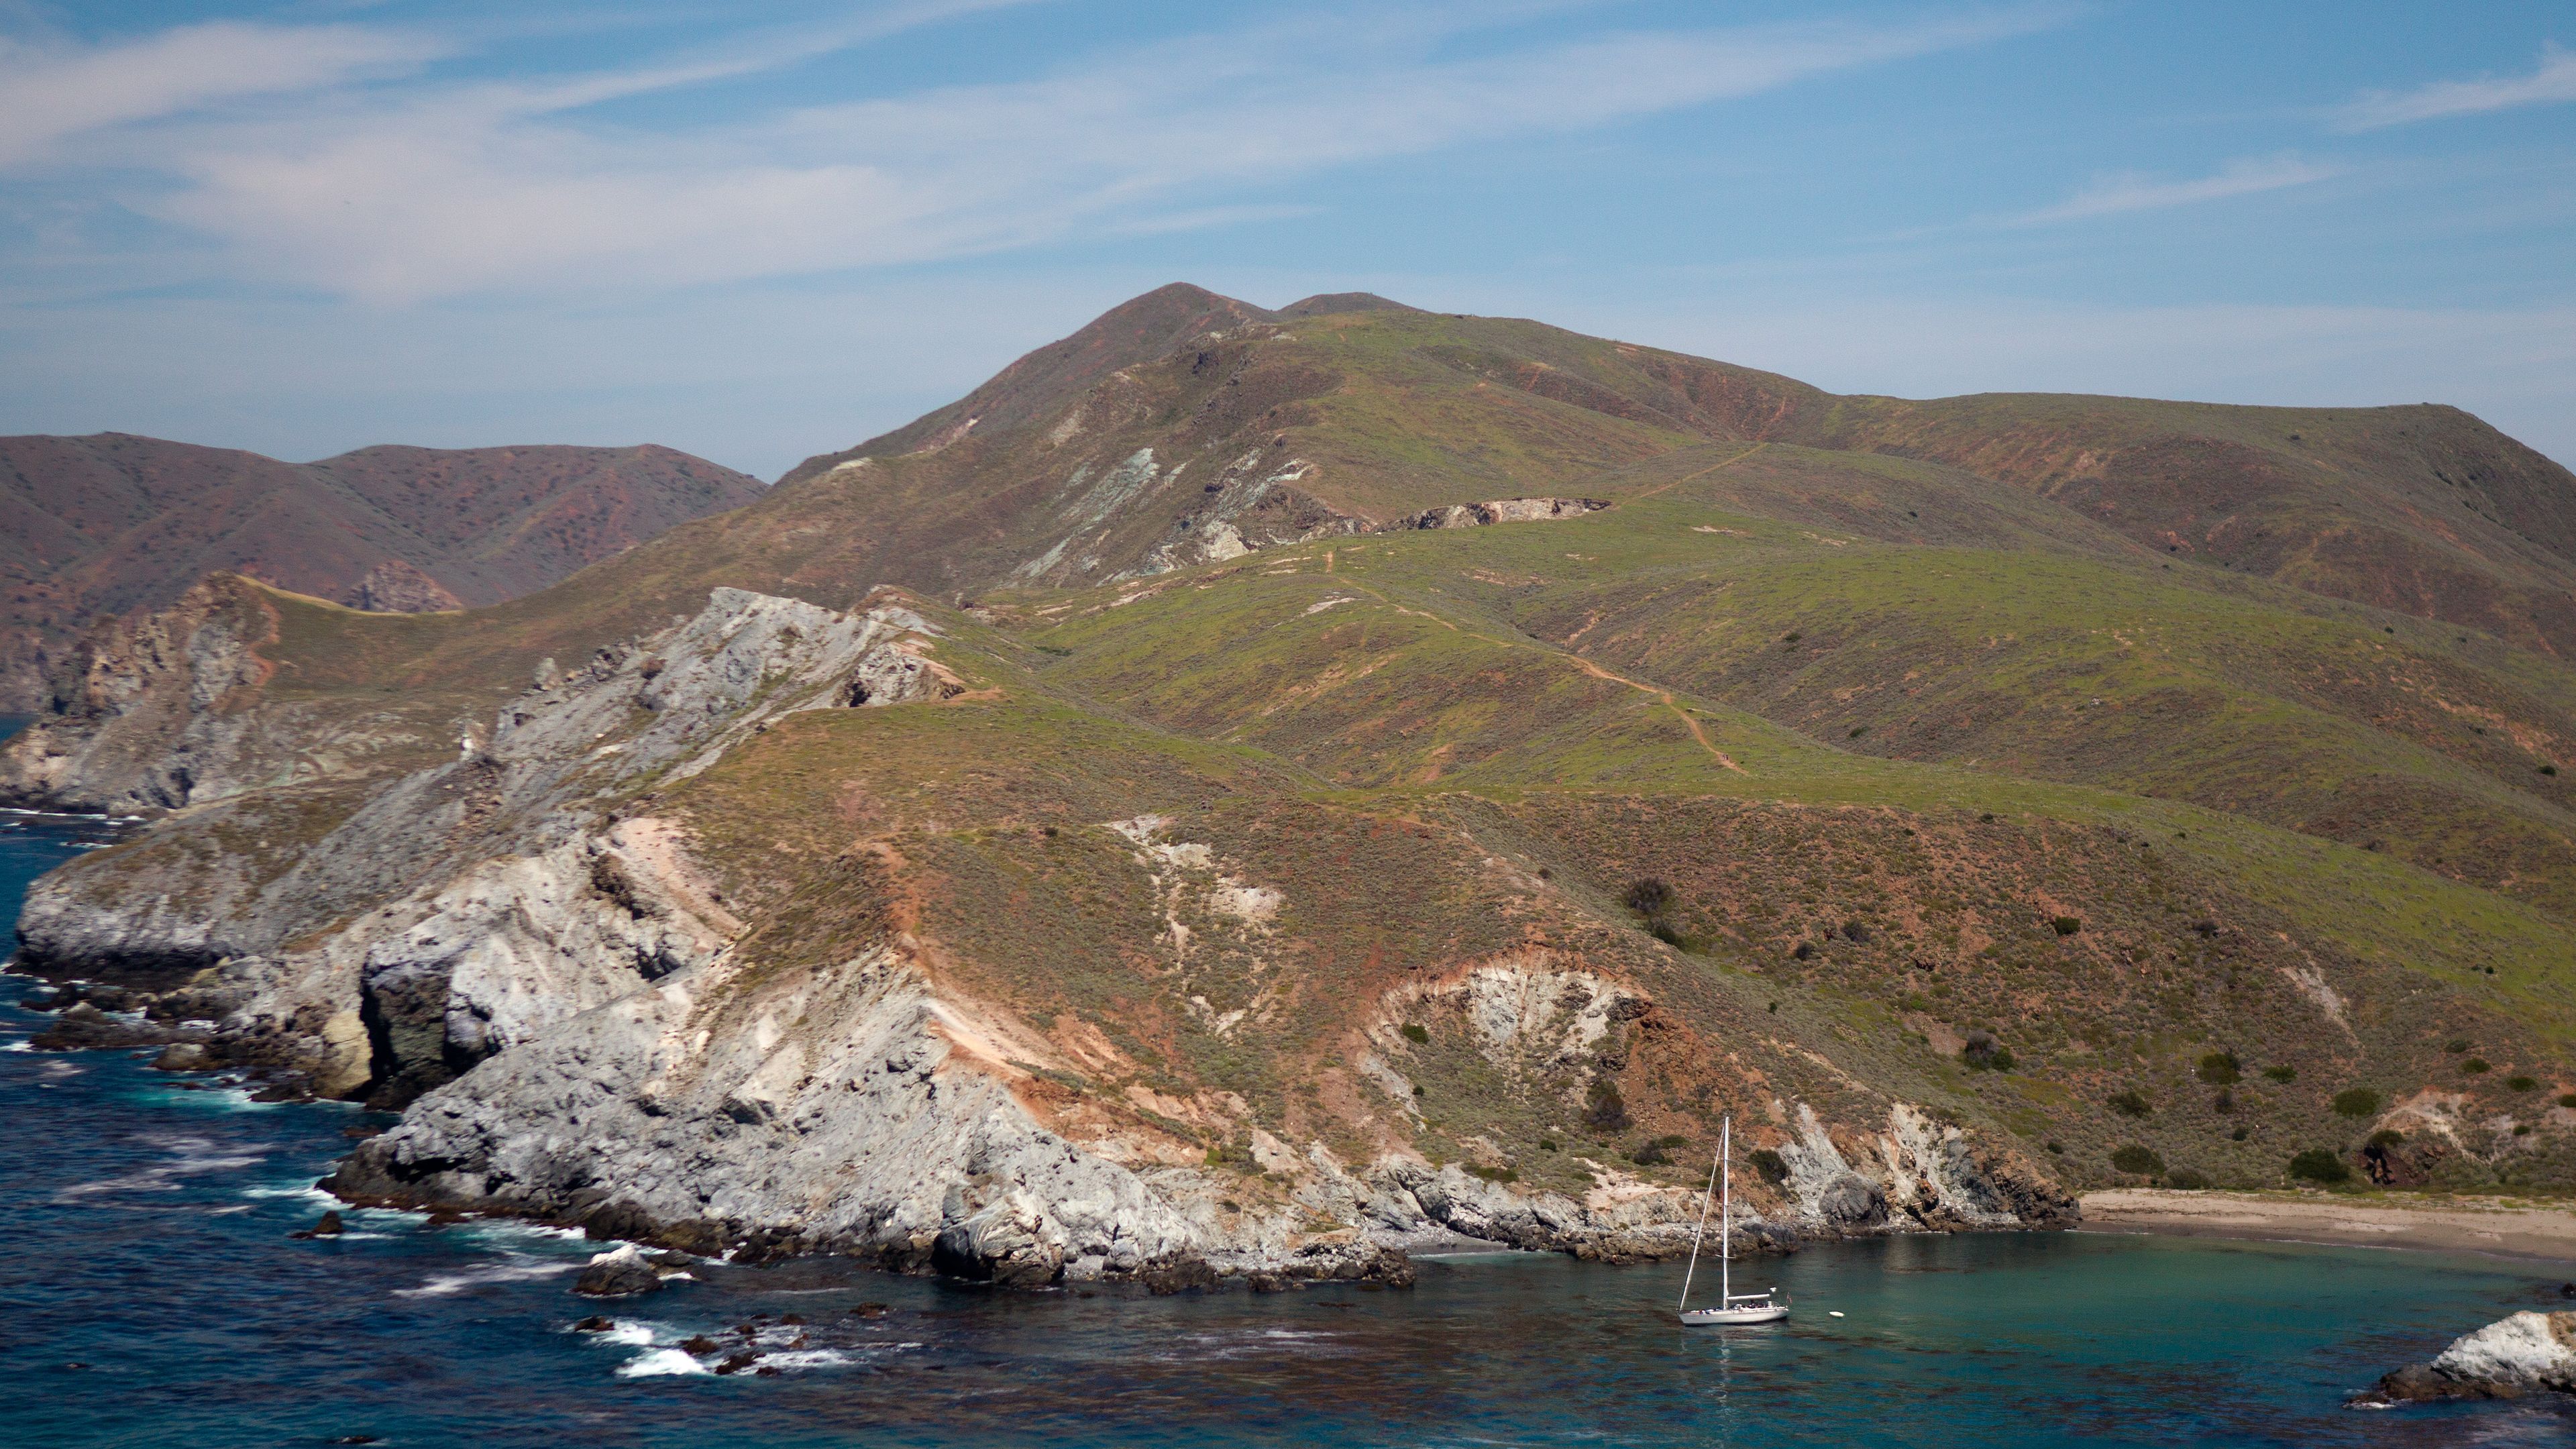 Volunteering in the USA: Looking over the rugged coast of Catalina Island